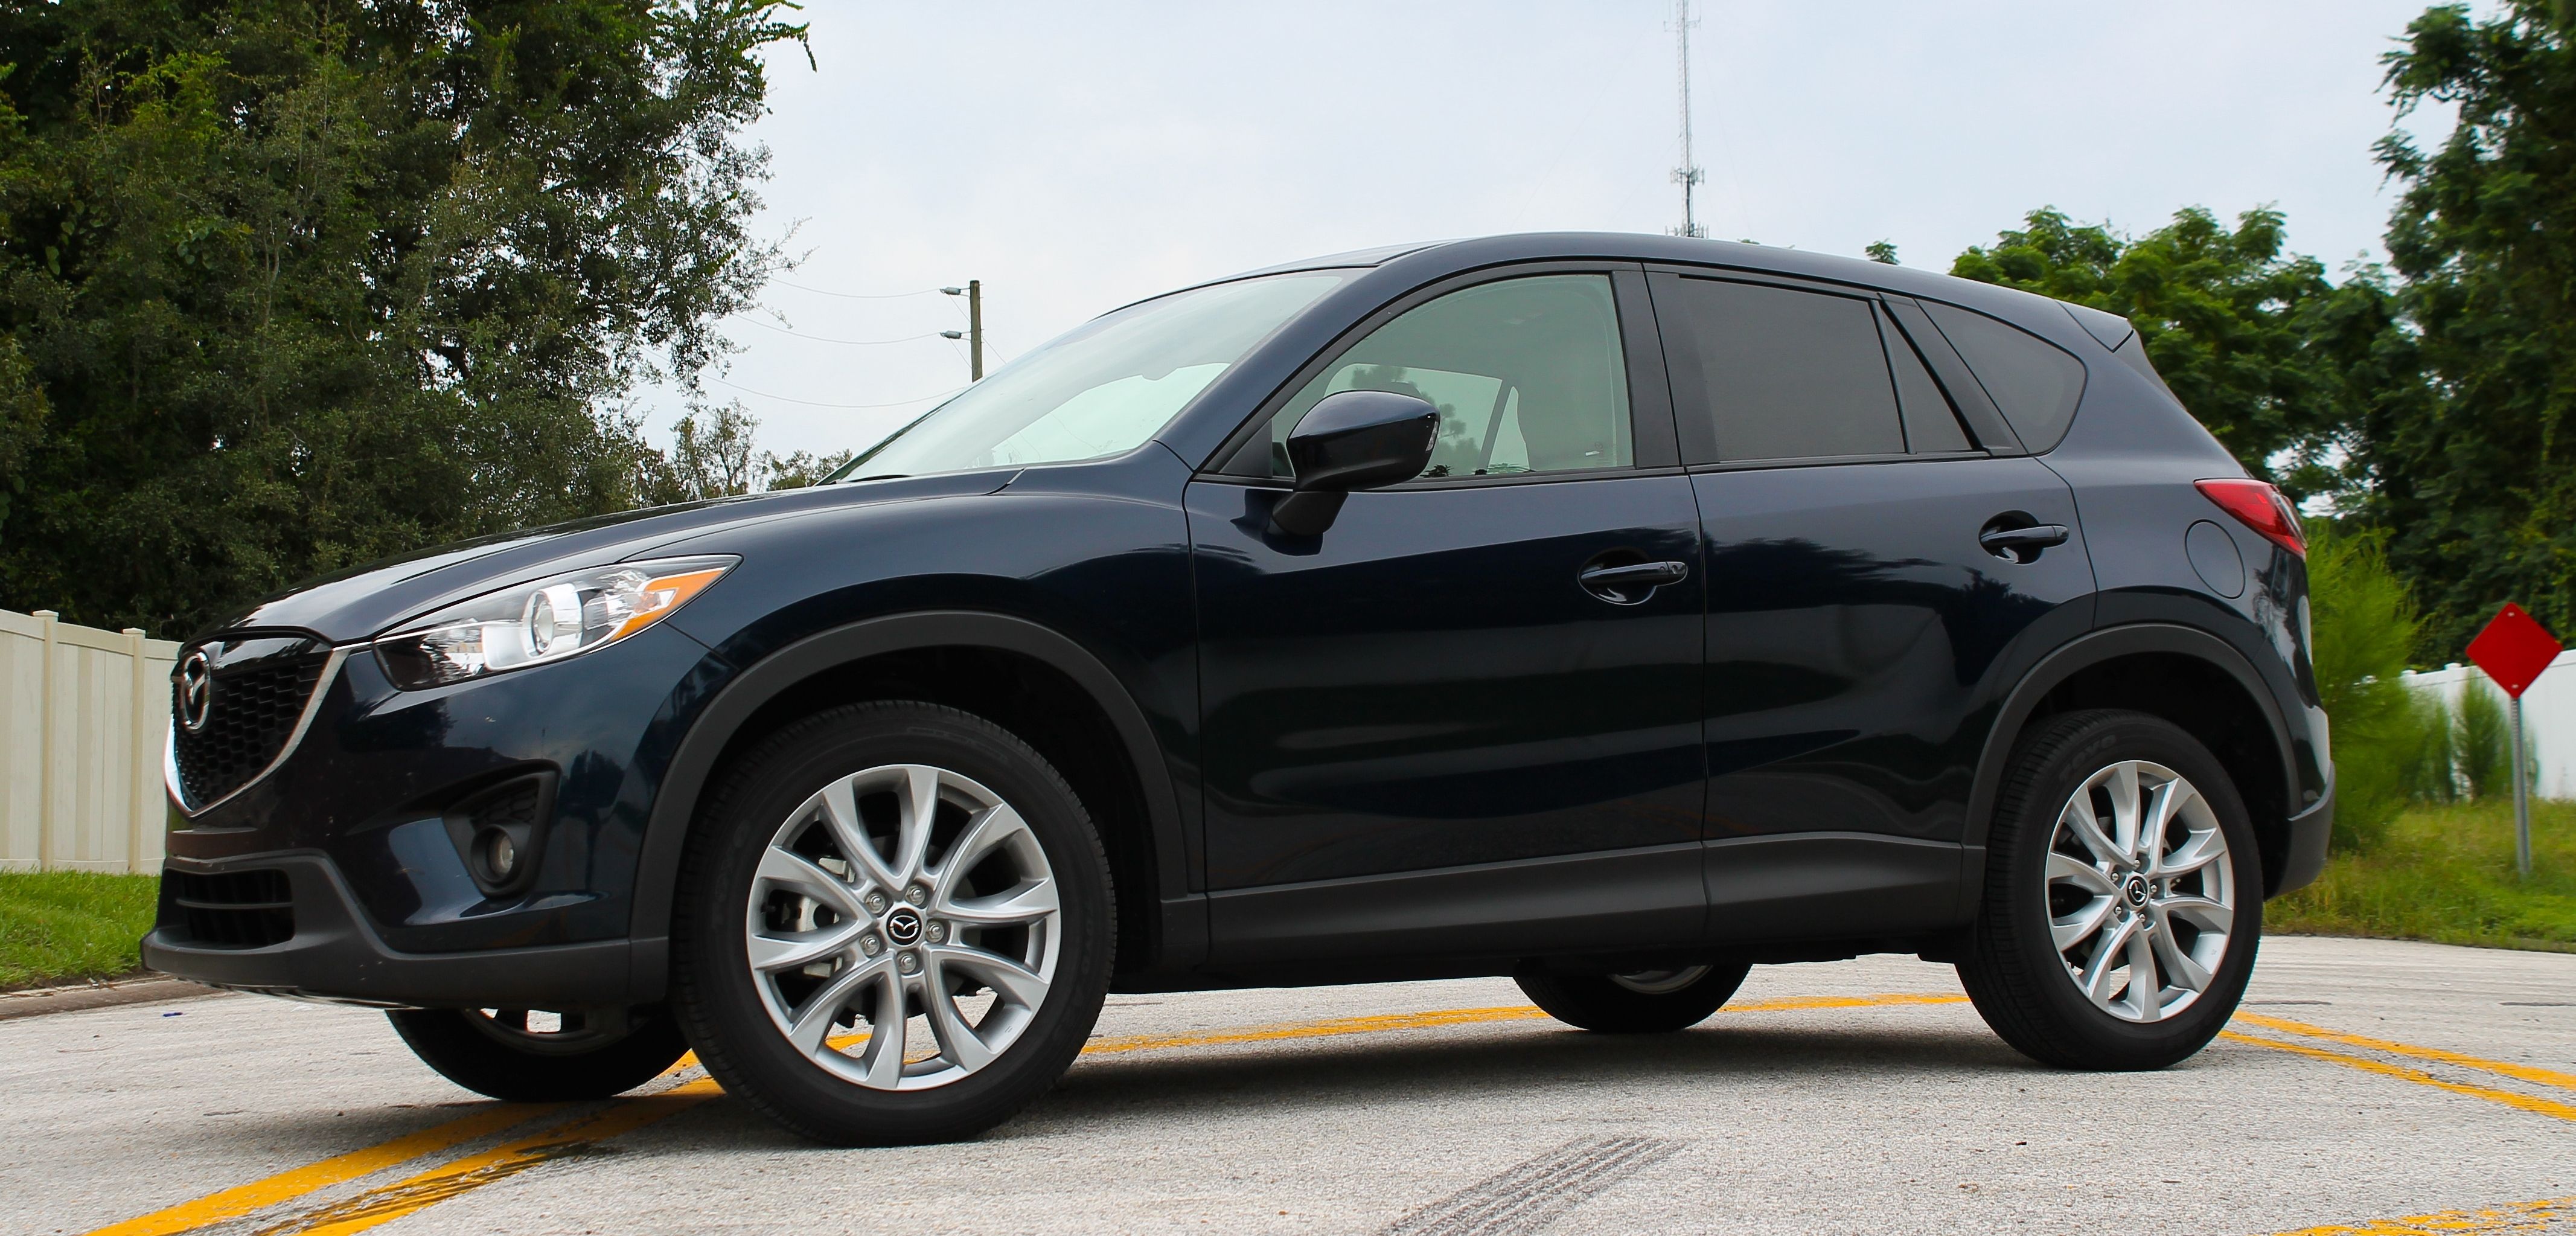  Justin Cupler had a weeklong drive in the 2015 Mazda CX-5 Grand Touring; did it amaze him as much as its smaller cousin, the Mazda3?